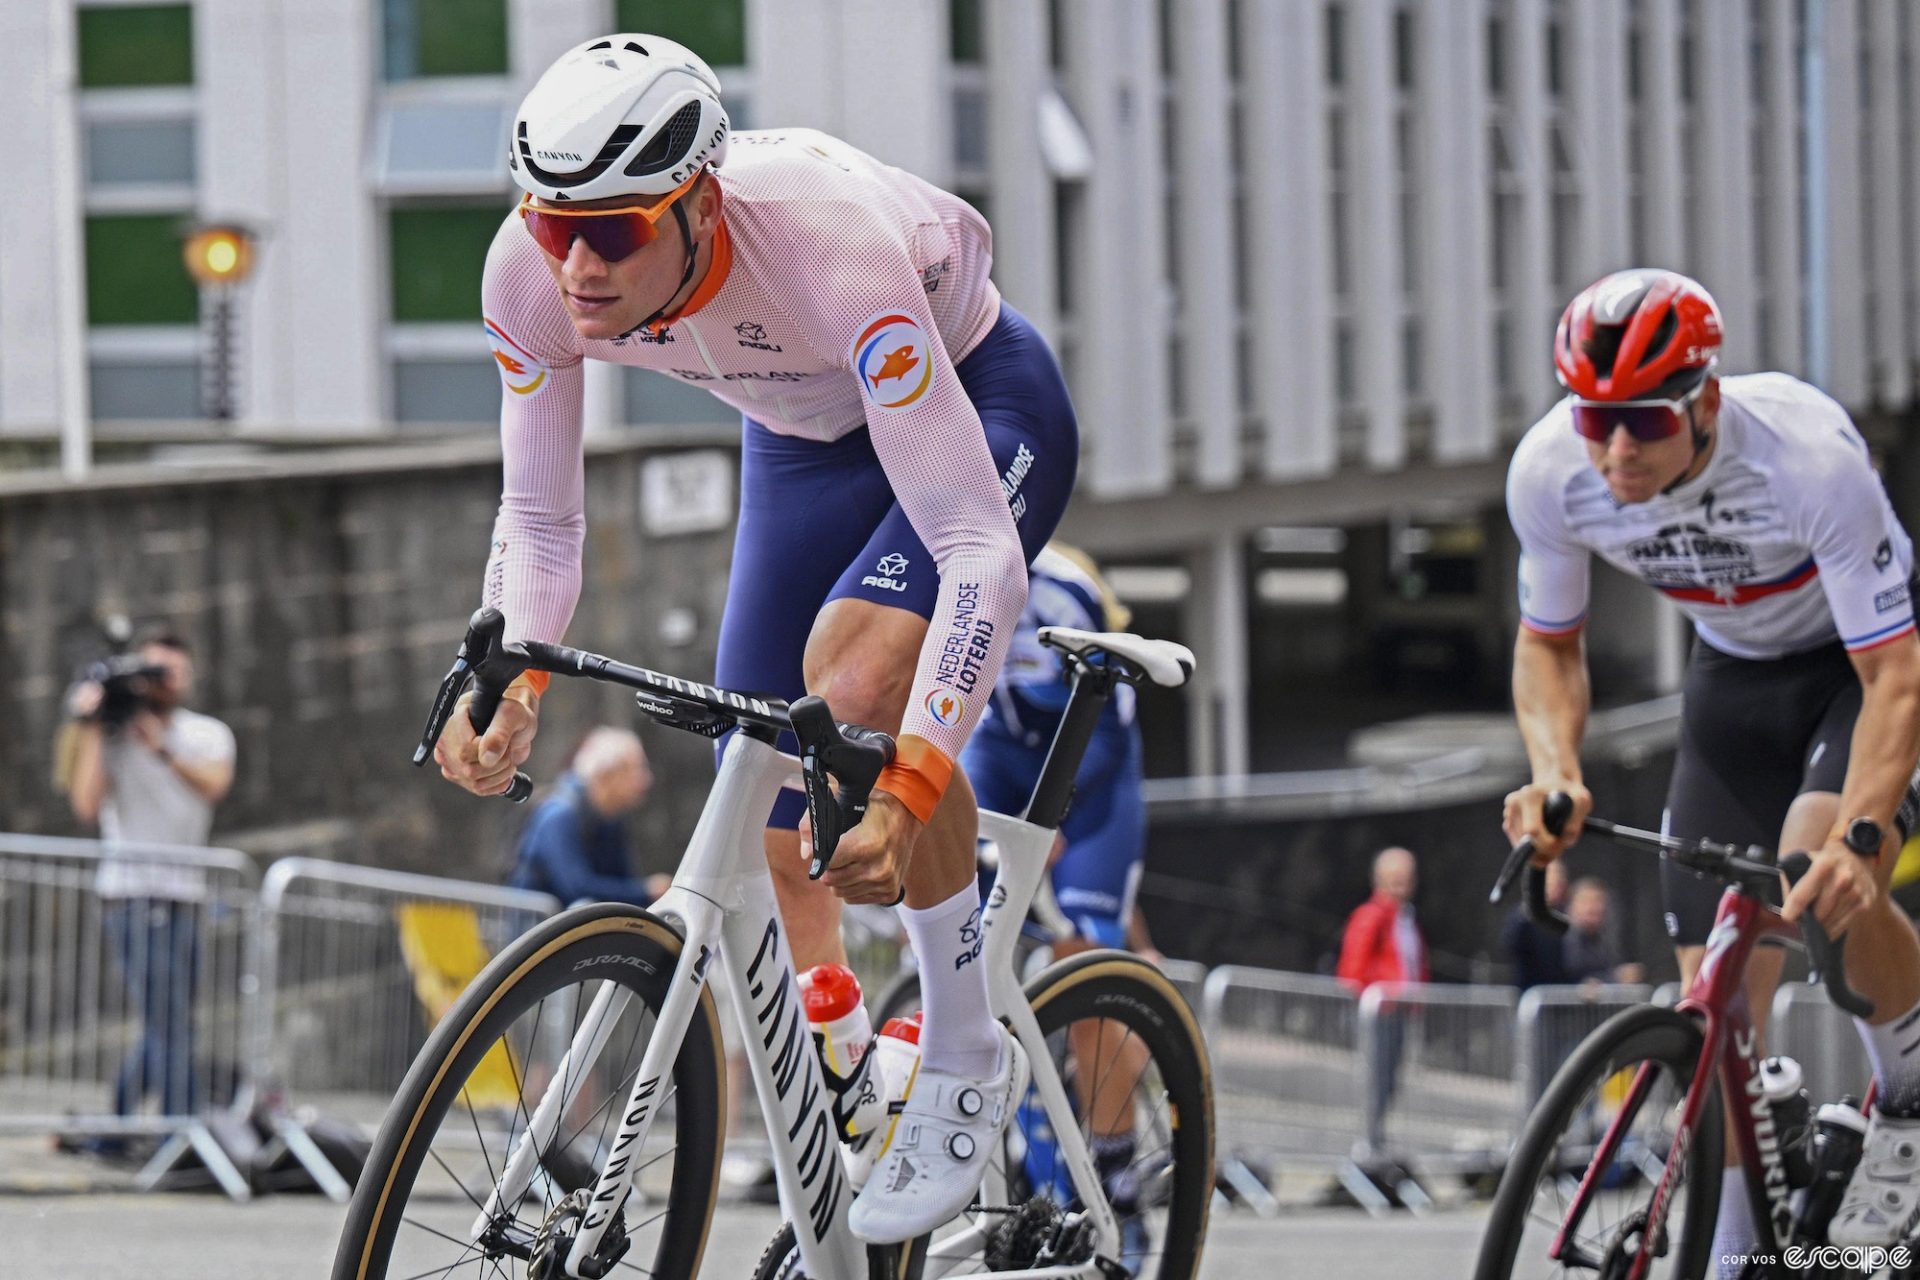 Dutch rider Mathieu van der Poel rides the Glasgow World Championships road course in training, pedaling up a short, steep climb out of the saddle while dressed in a white long-sleeve jersey and blue shorts.